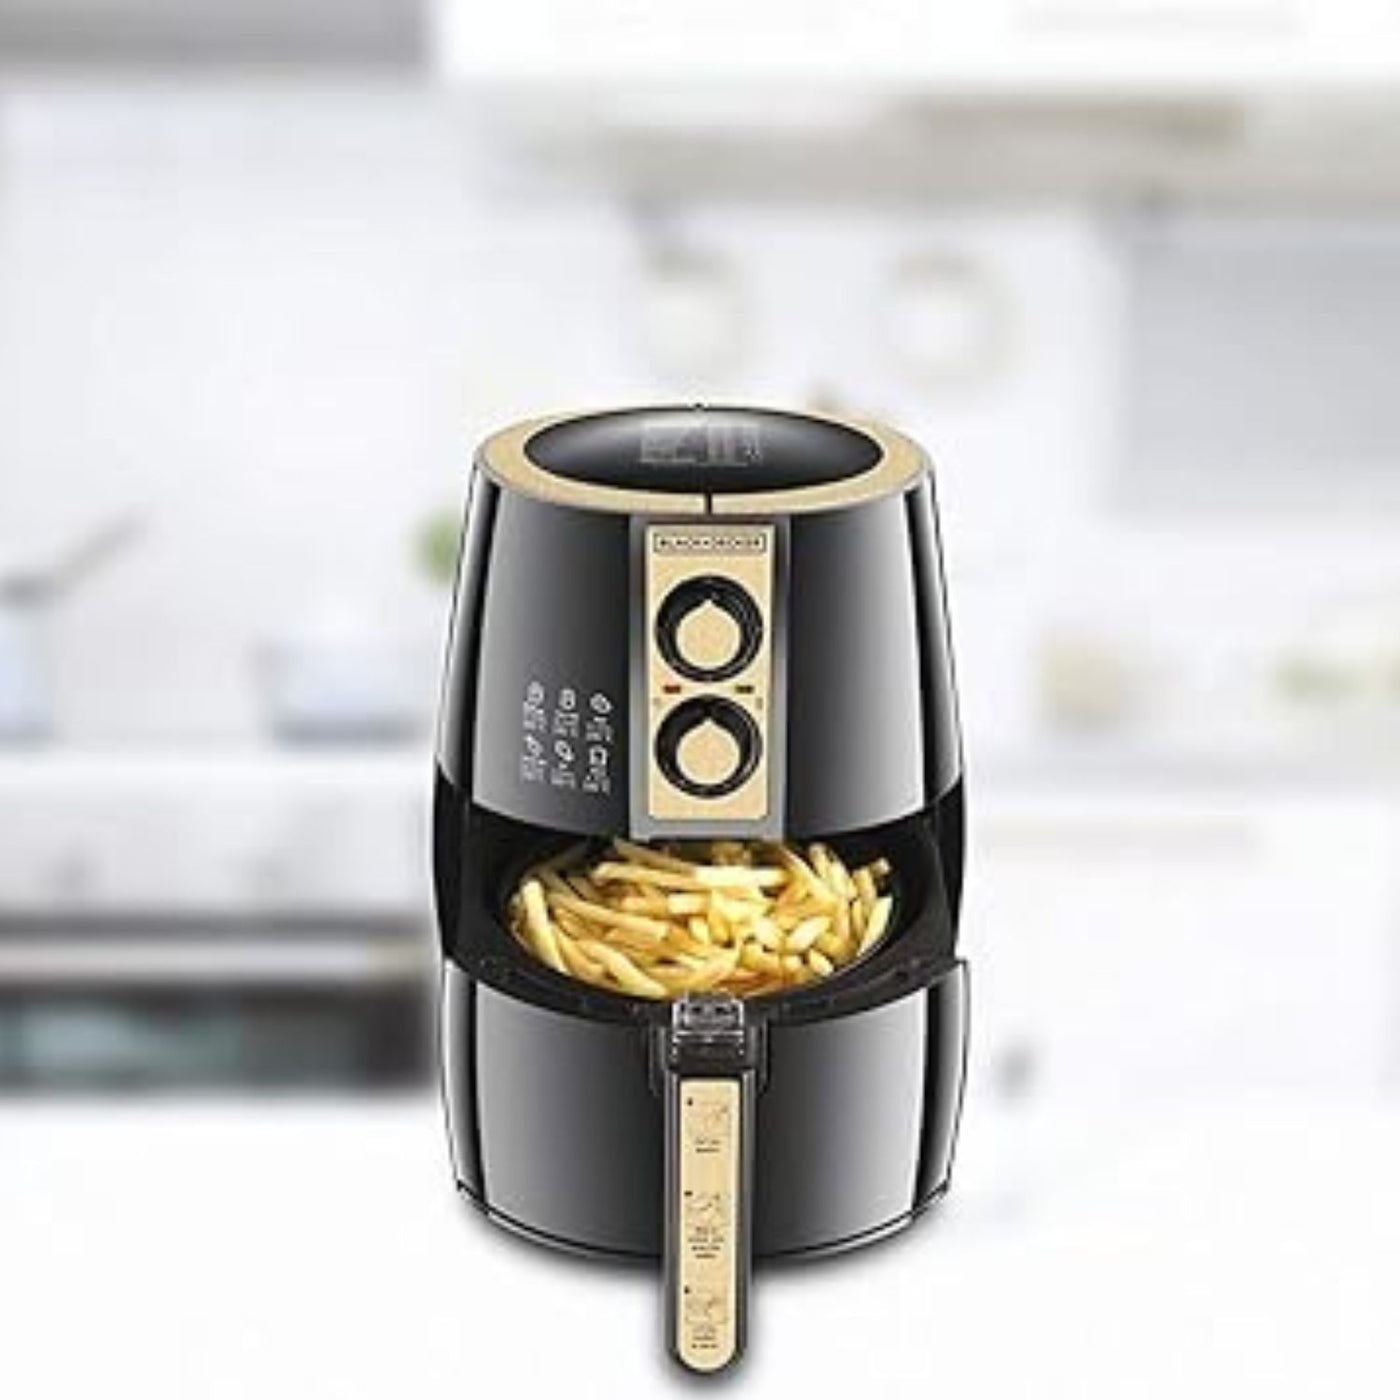 2.5 Liter 800G 1500W Manual Air Fryer Aerofry With Rapid Air Covection Technology, Black/Gold